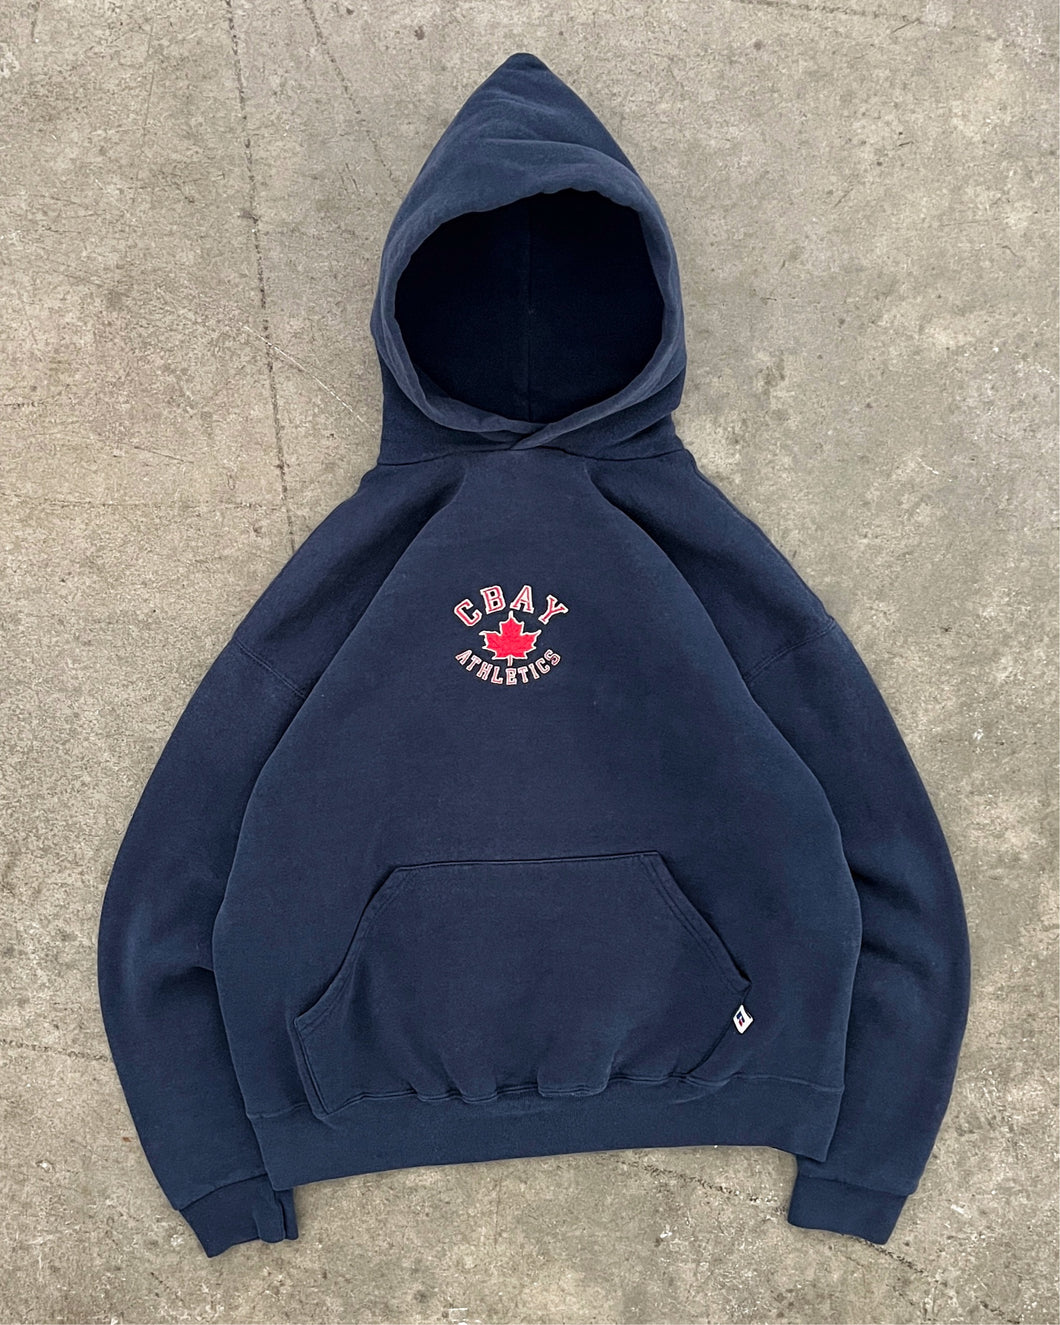 FADED NAVY BLUE “CBAY ATHLETICS” RUSSELL HOODIE - 1990S